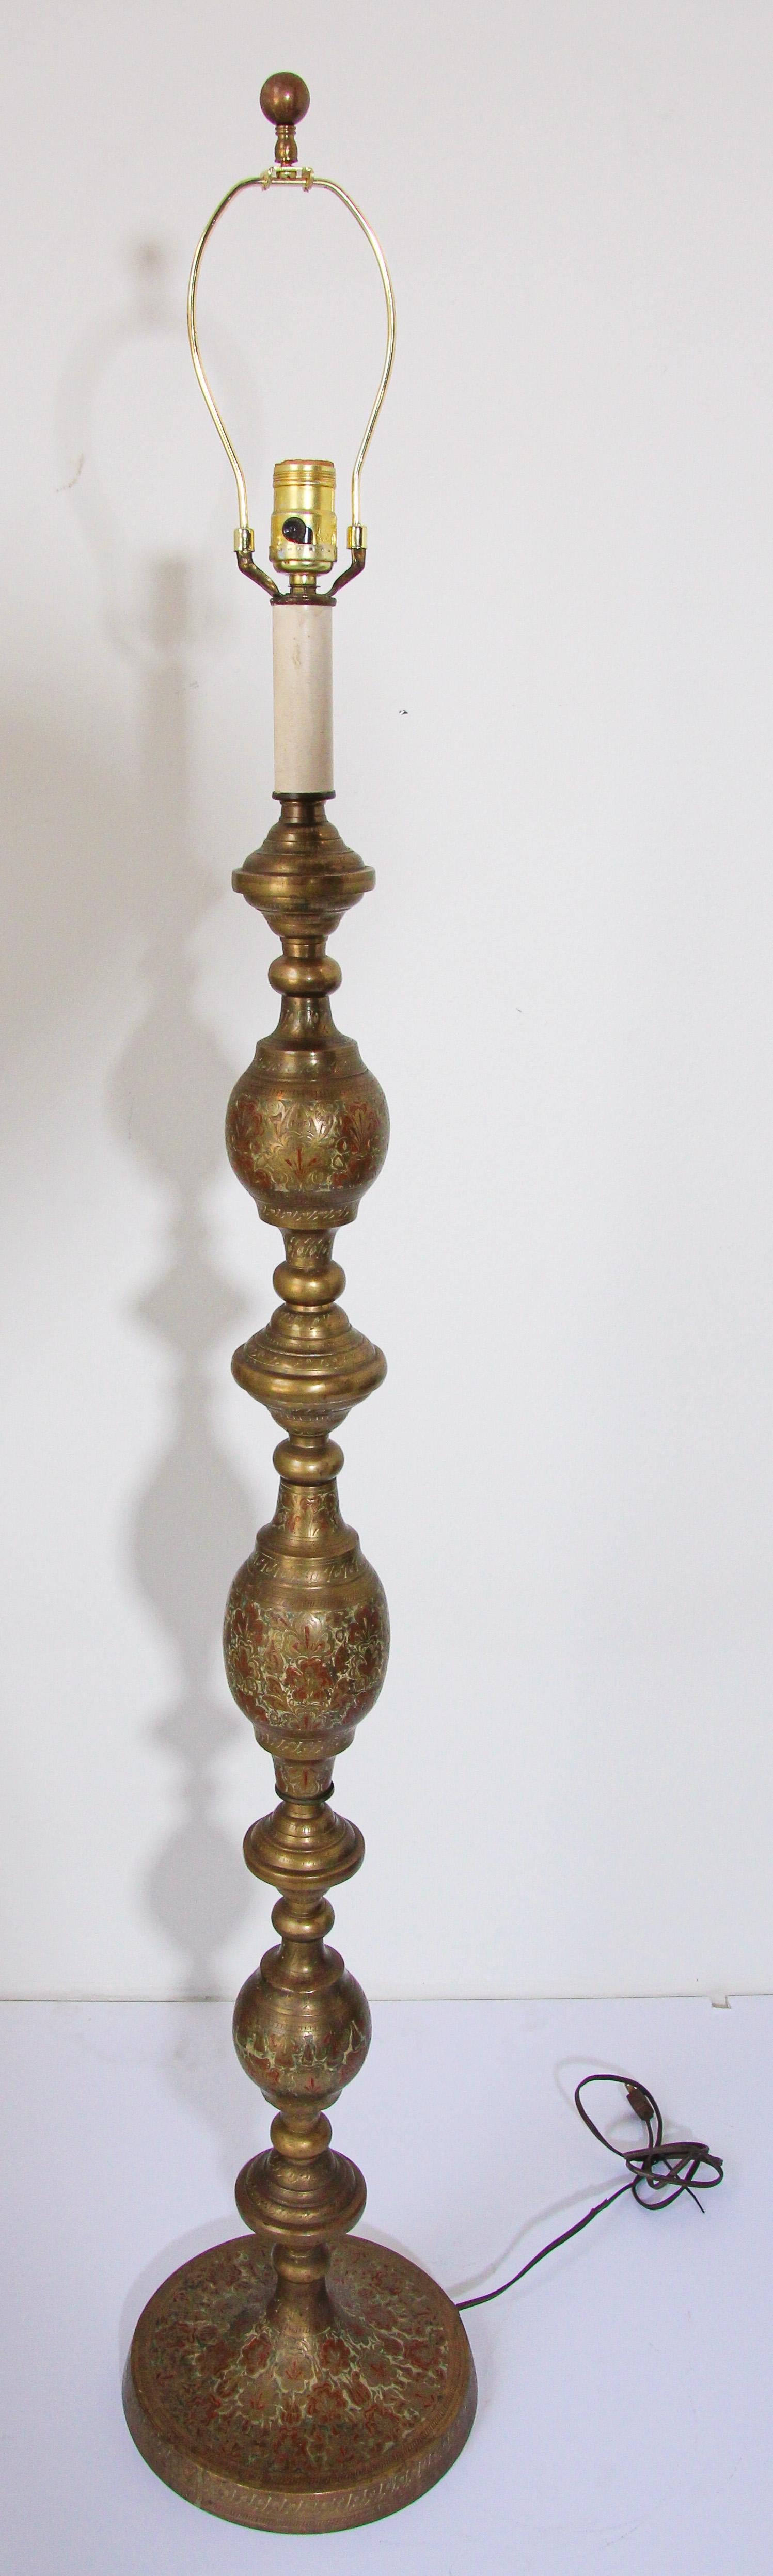 Vintage Brass and Enamel Floor Lamp Handcrafted in India 3